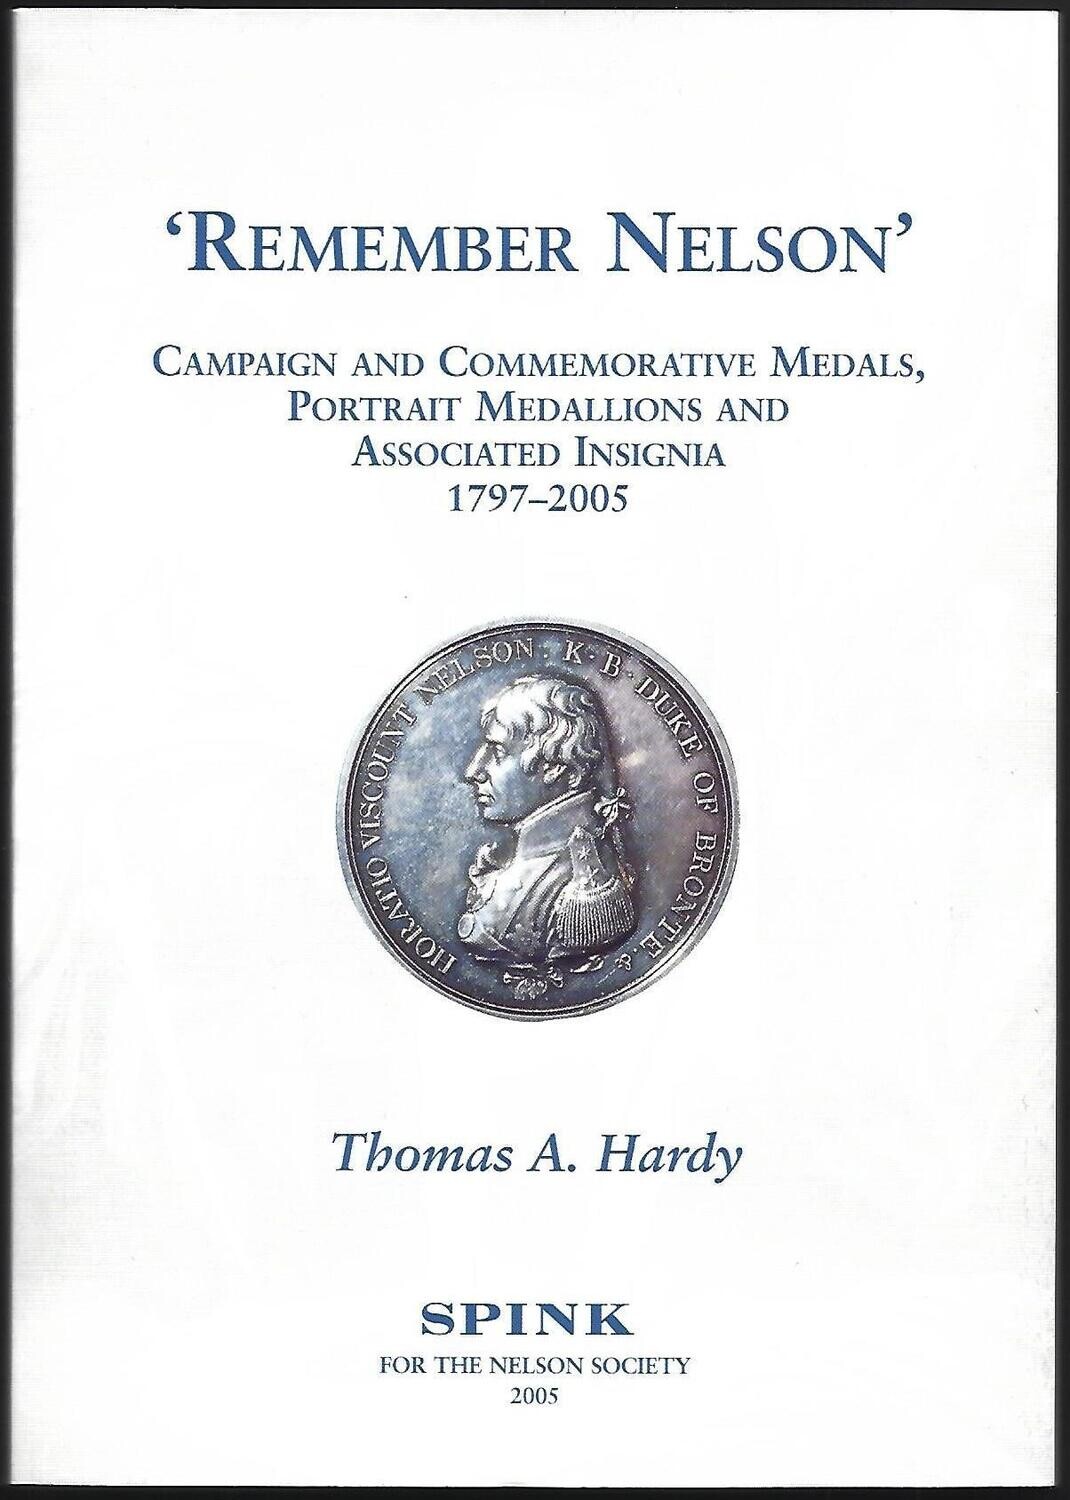 Medals; Thomas A. Hardy, "Remember Nelson"